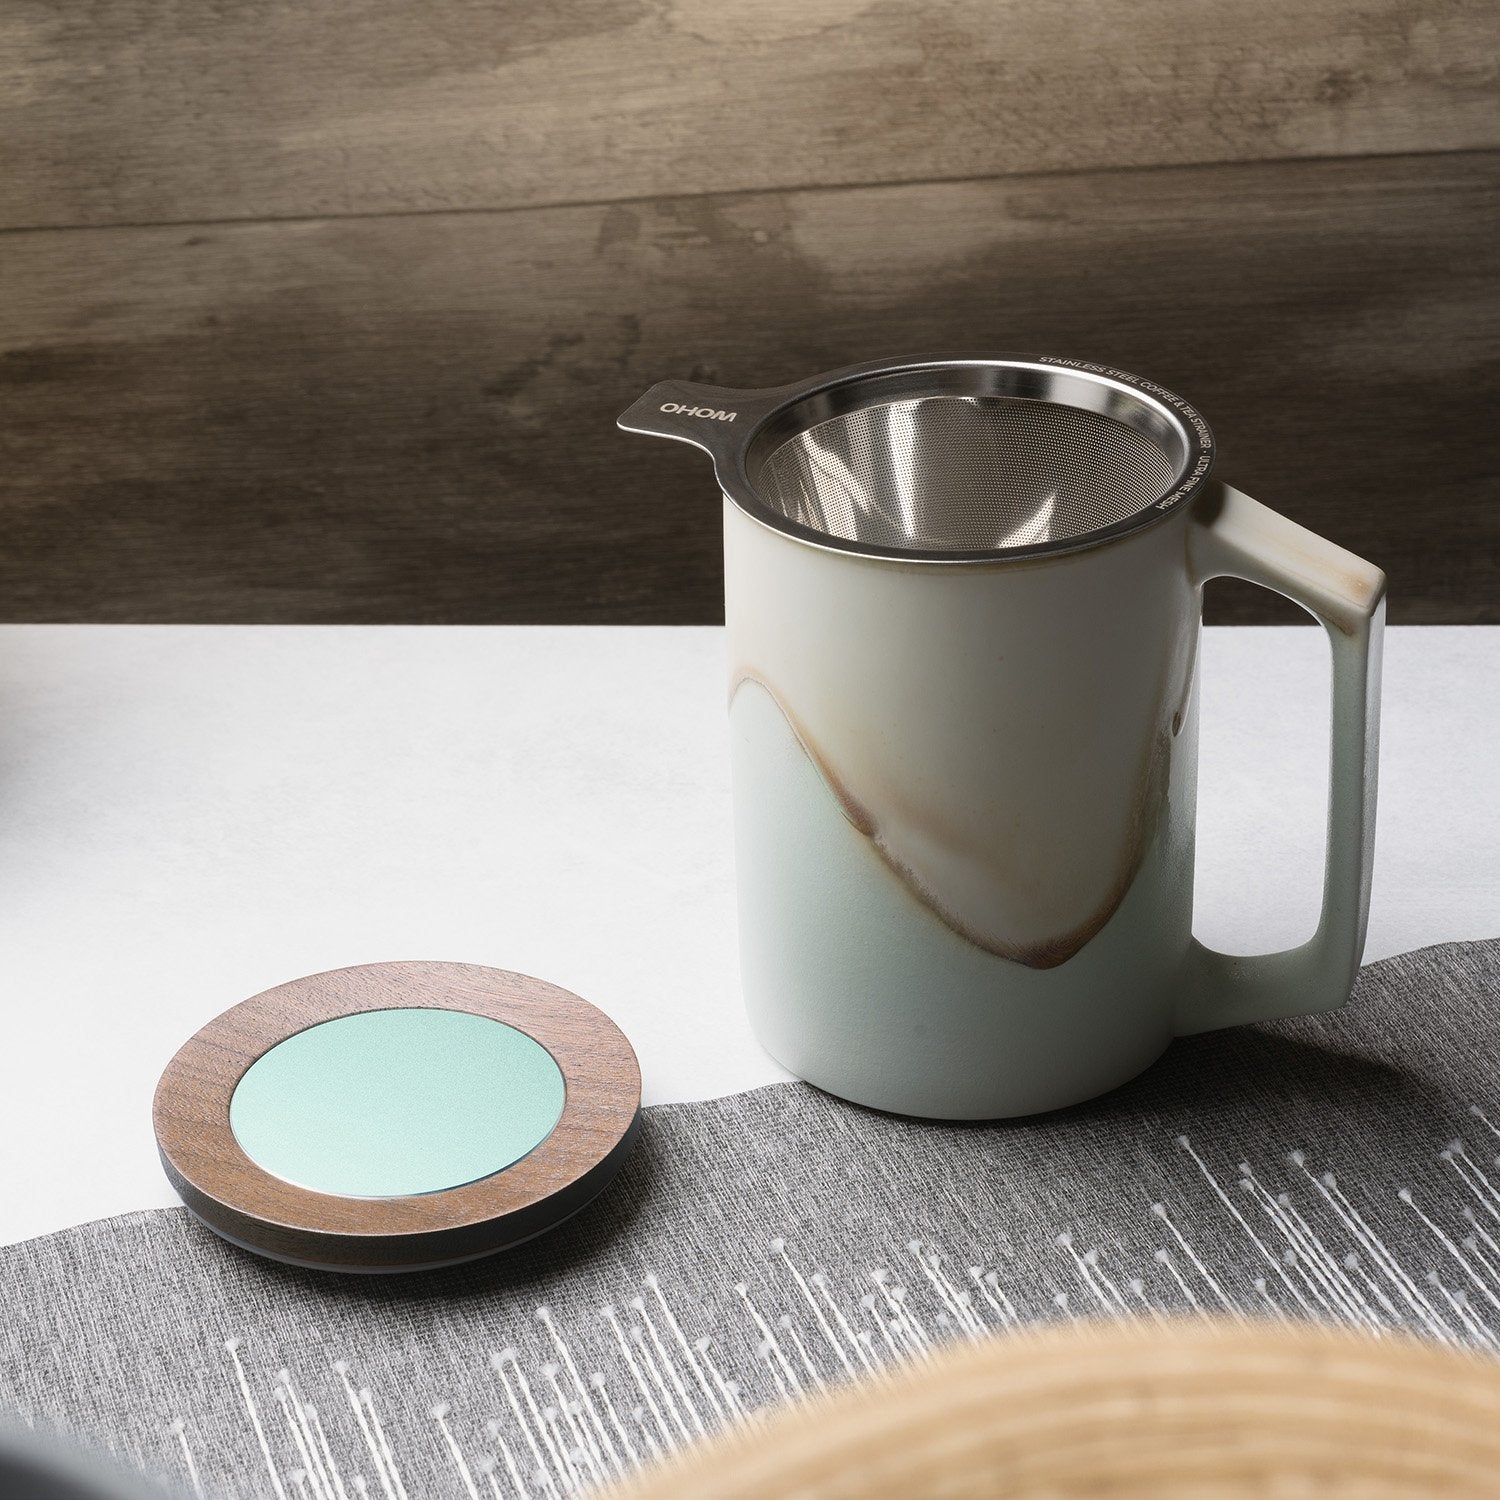 Mint colored mug with design and strainer and lid